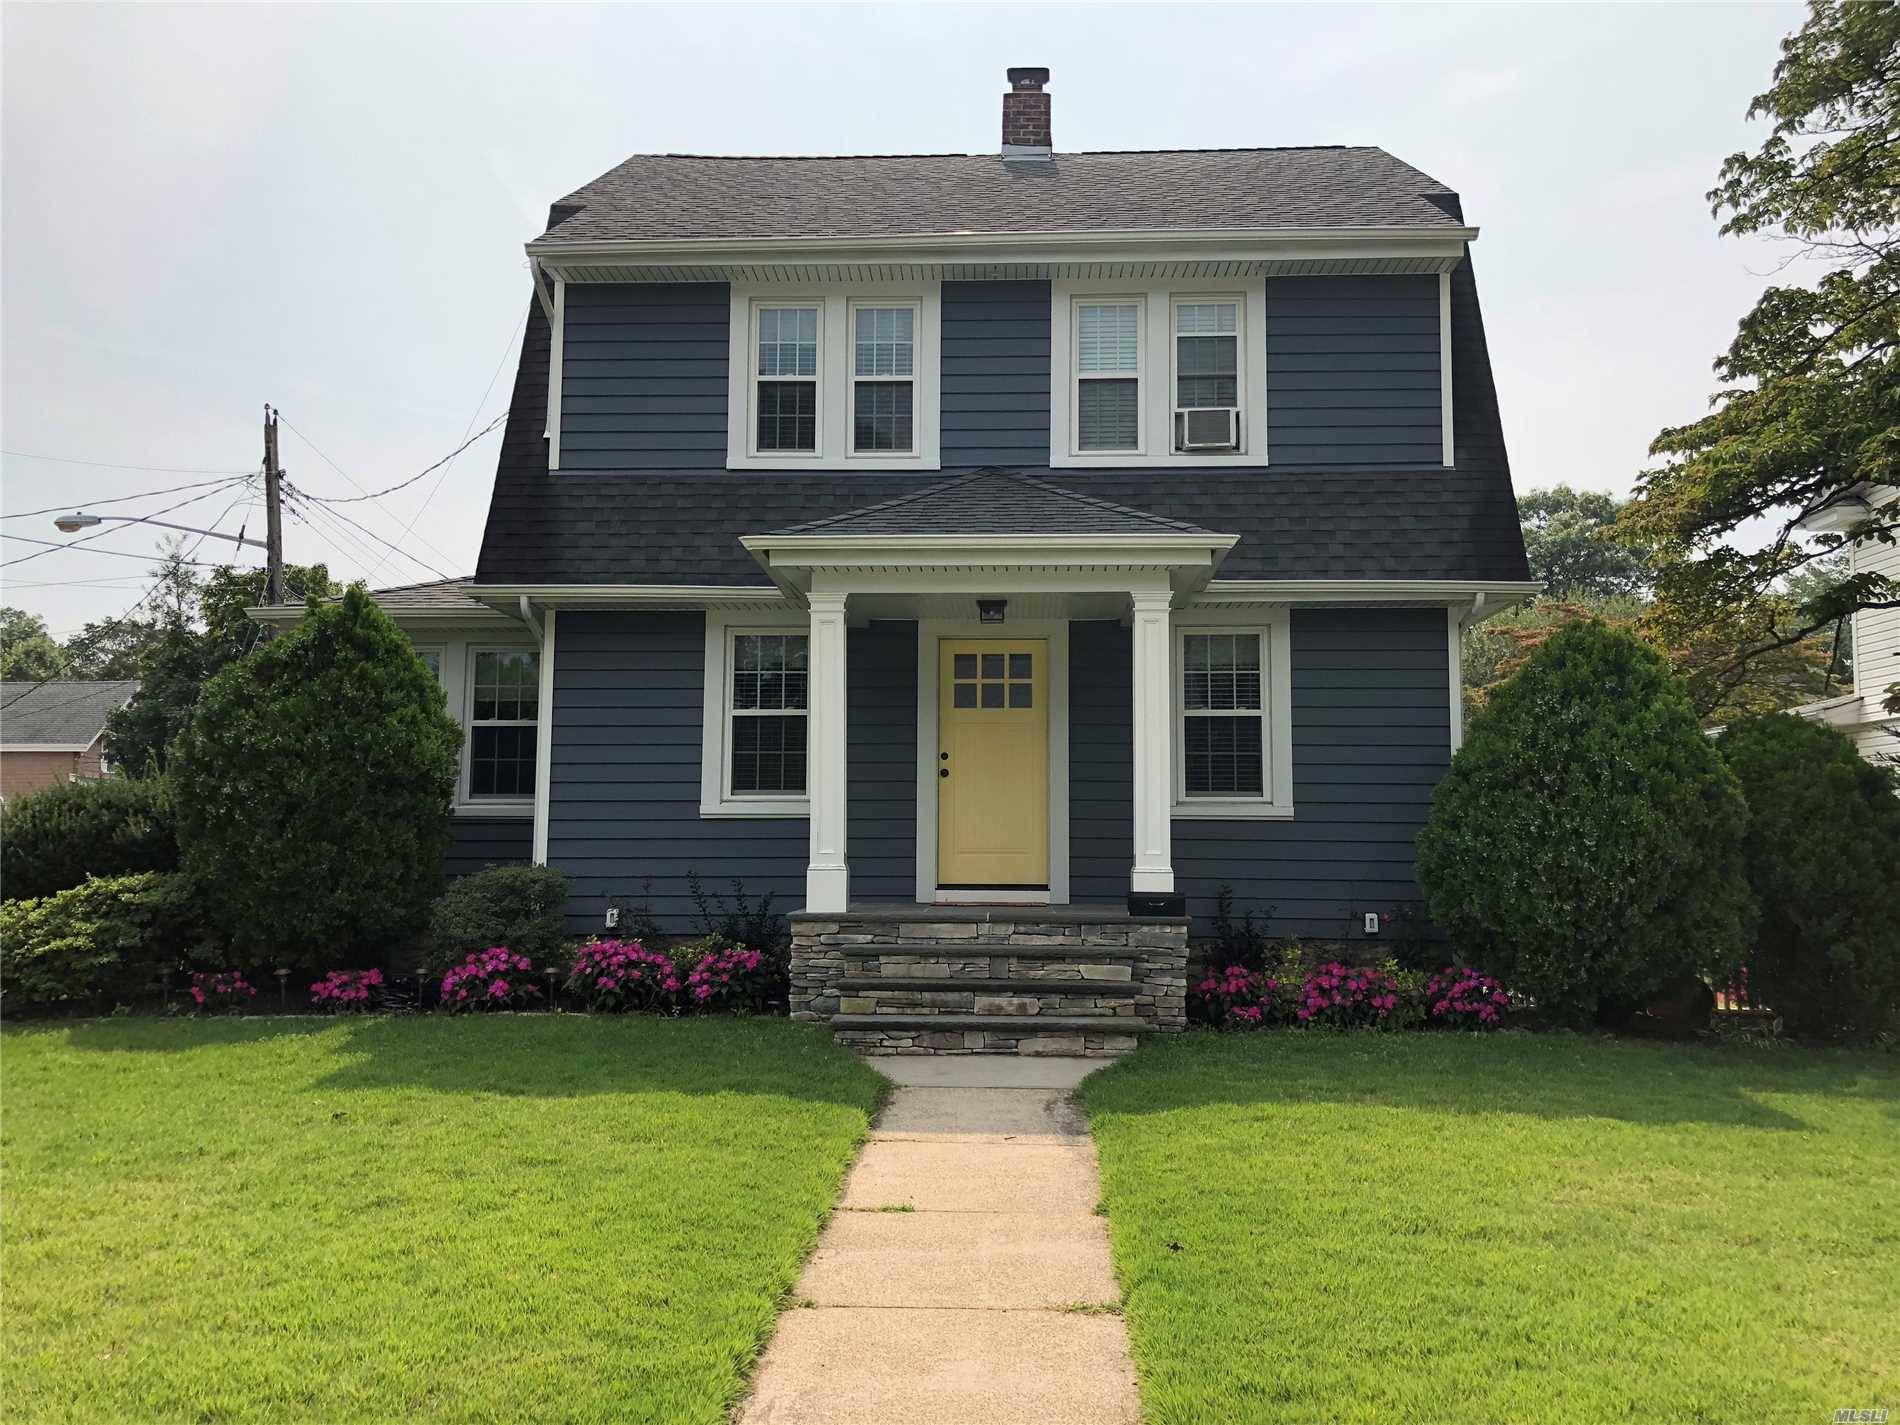 Move In Ready 3 Bedroom 2 Bath Colonial In The Hart Of Rvc With Low Taxes.